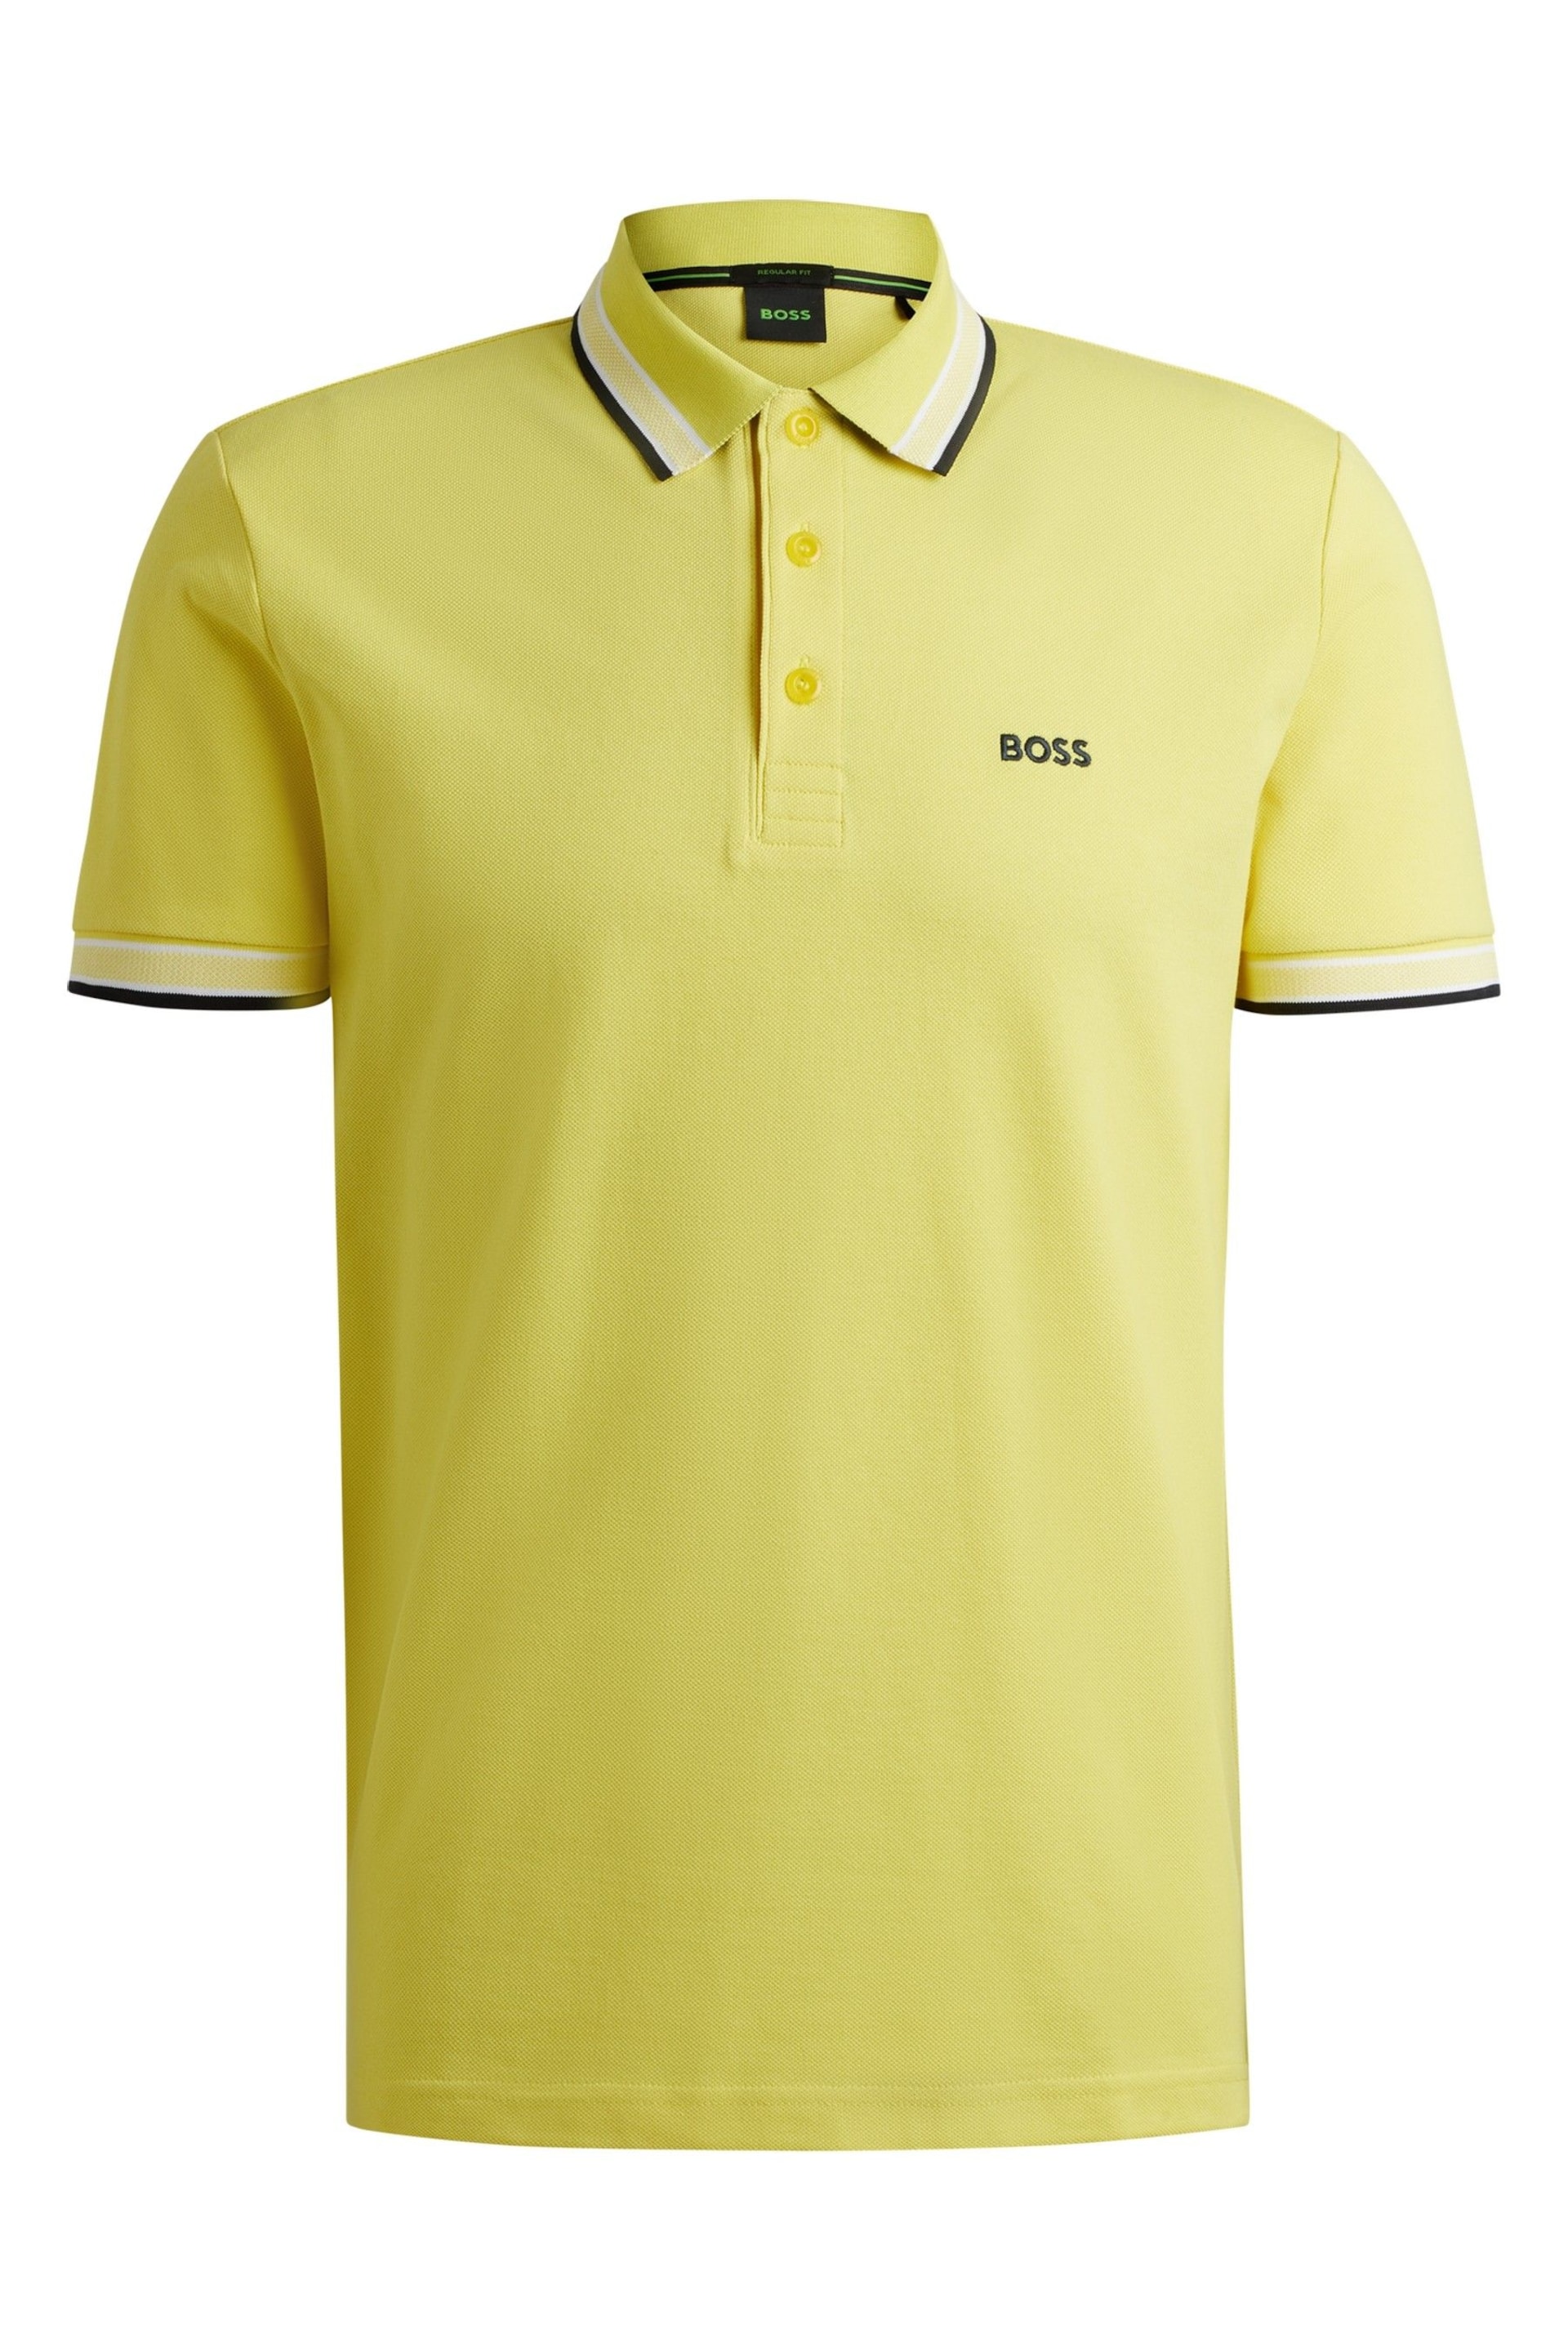 BOSS Yellow Cotton Polo Shirt With Contrast Logo Details - Image 5 of 5